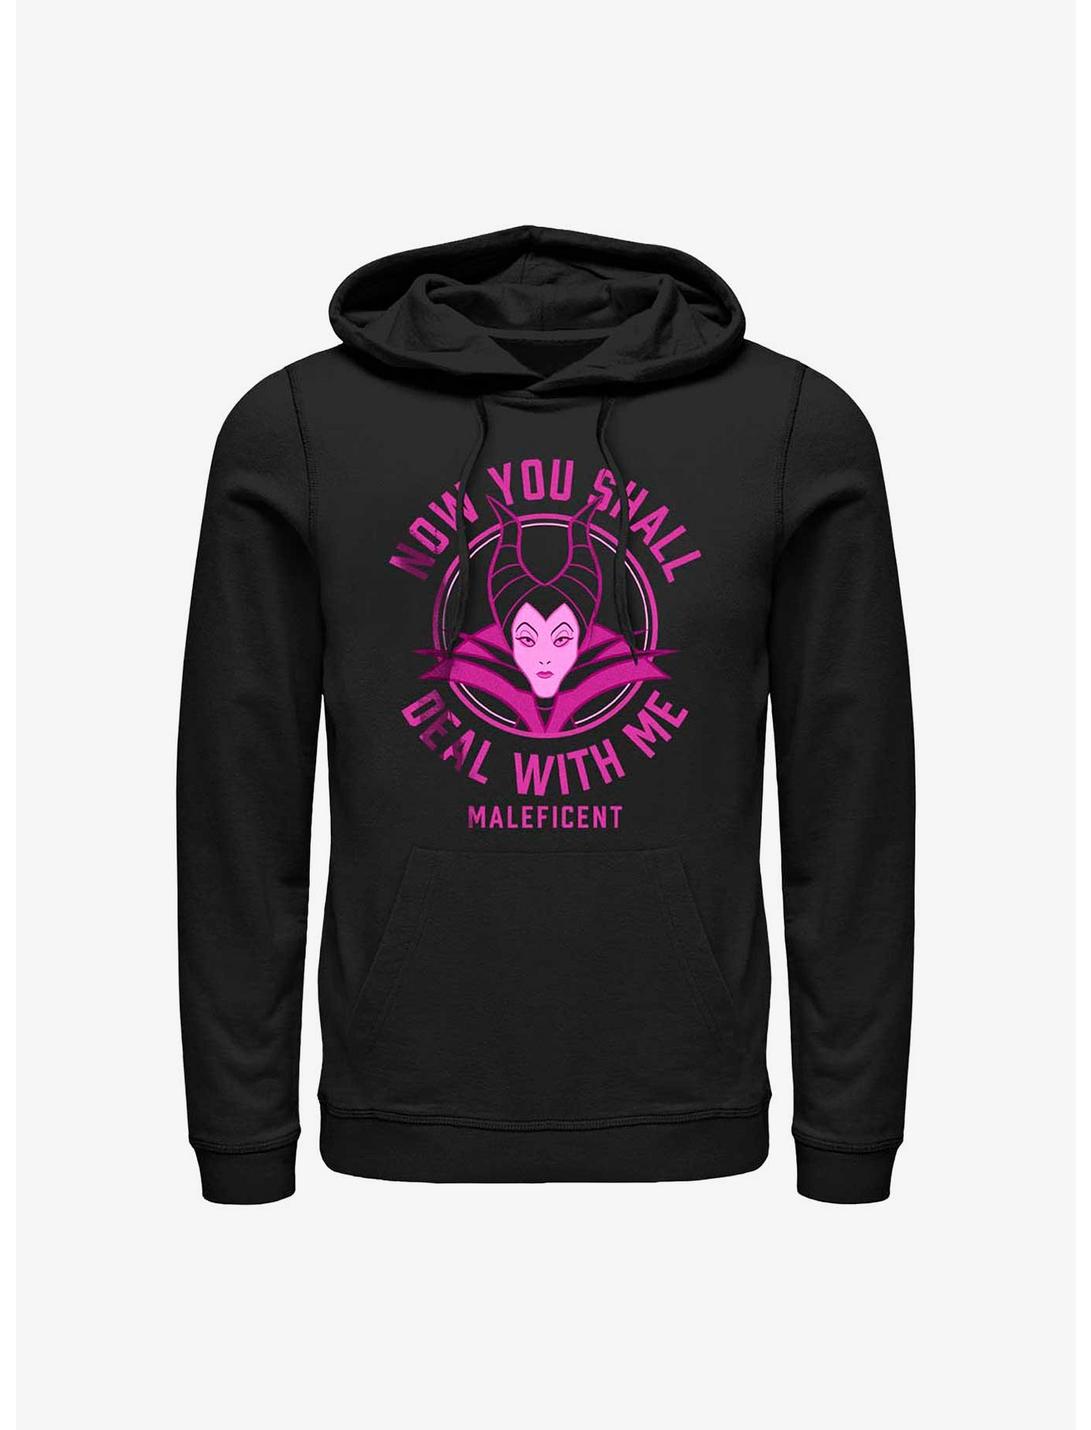 Disney Villains Now You Shall Deal With Me Maleficent Hoodie, BLACK, hi-res